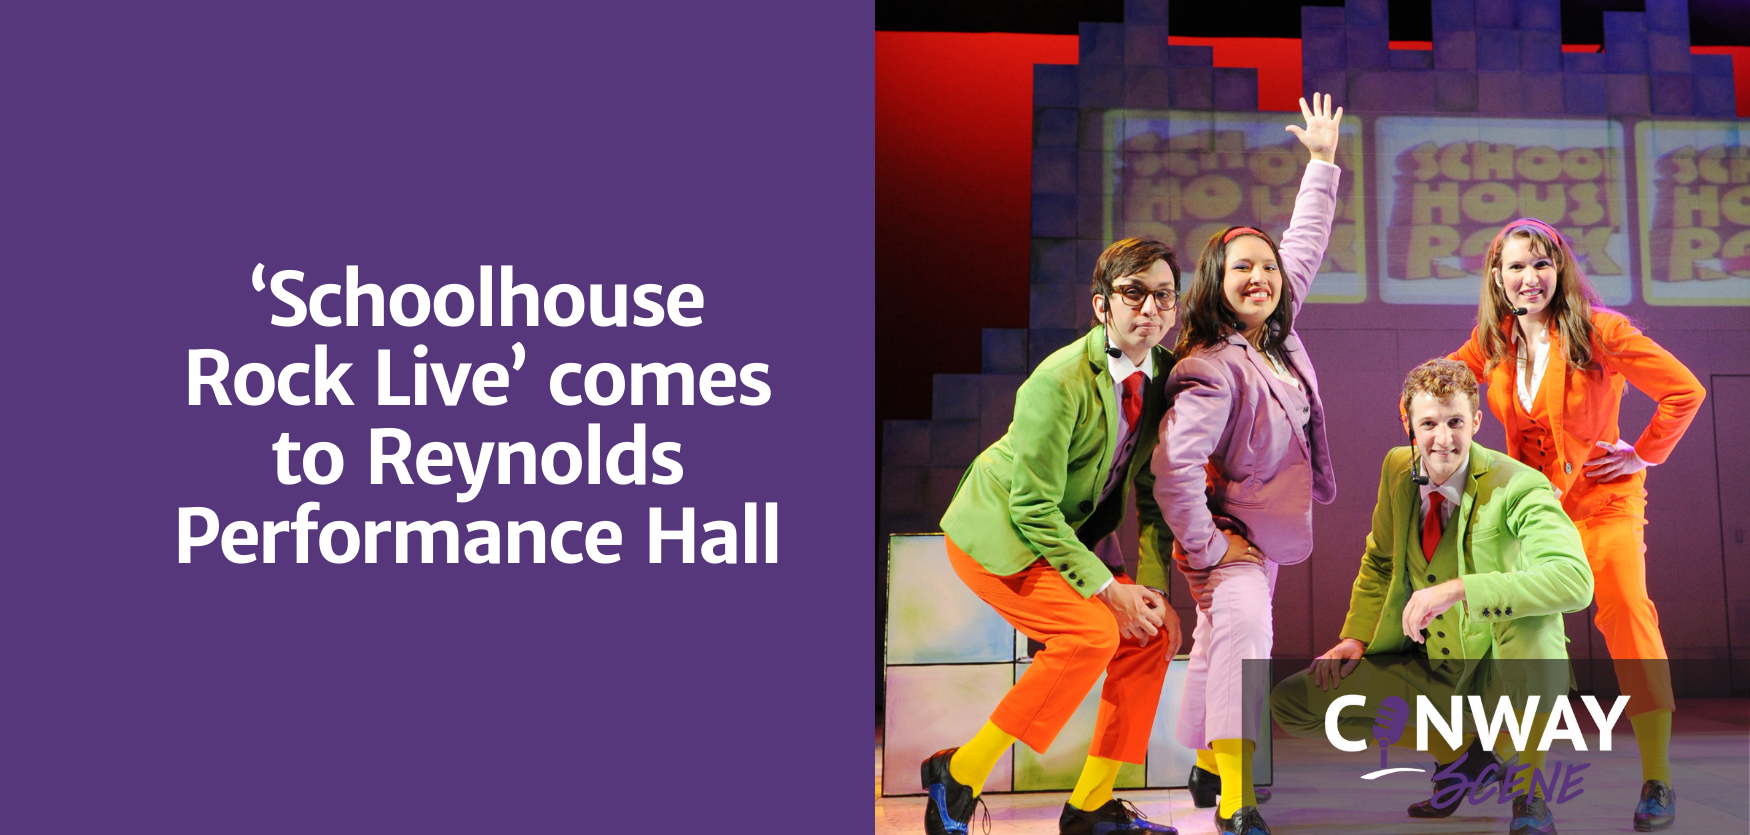 ‘Schoolhouse Rock Live’ comes to Reynolds Performance Hall